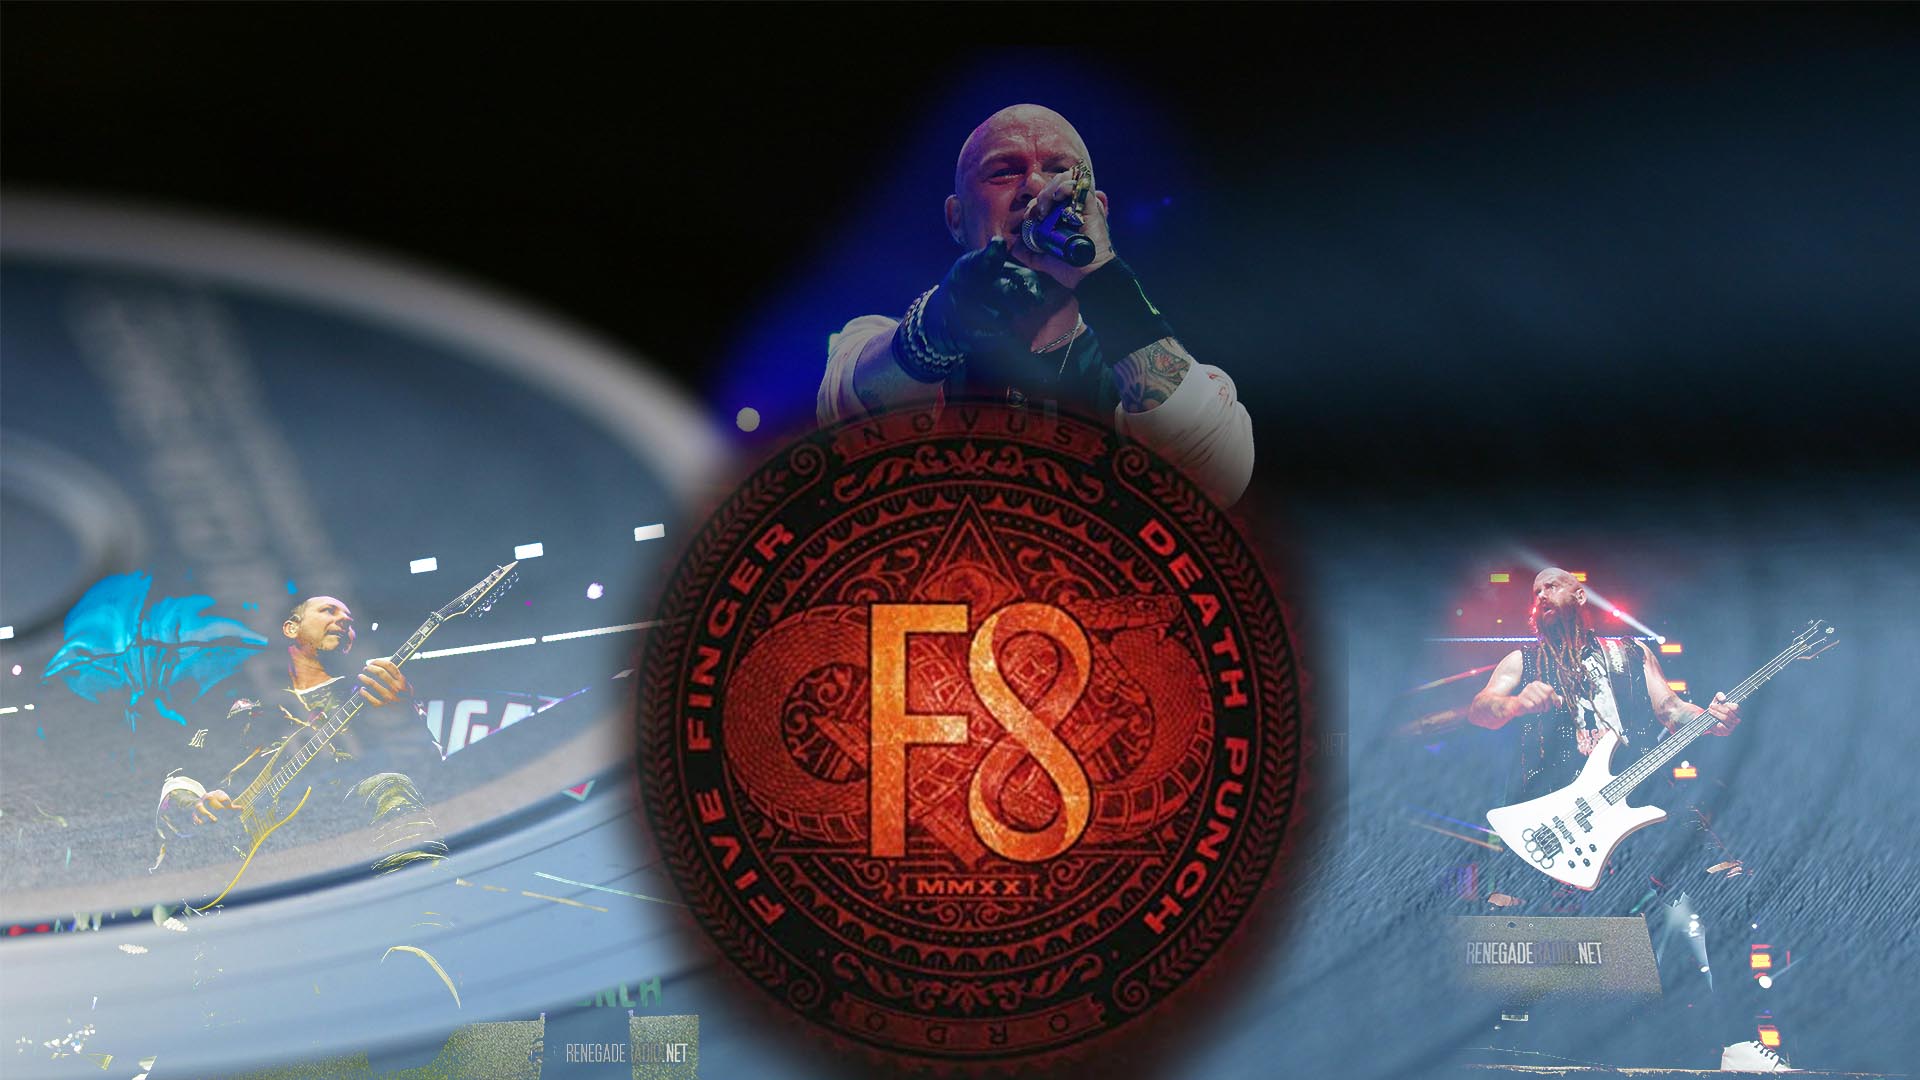 Review: Five Finger Death Punch – F8 (Fate)